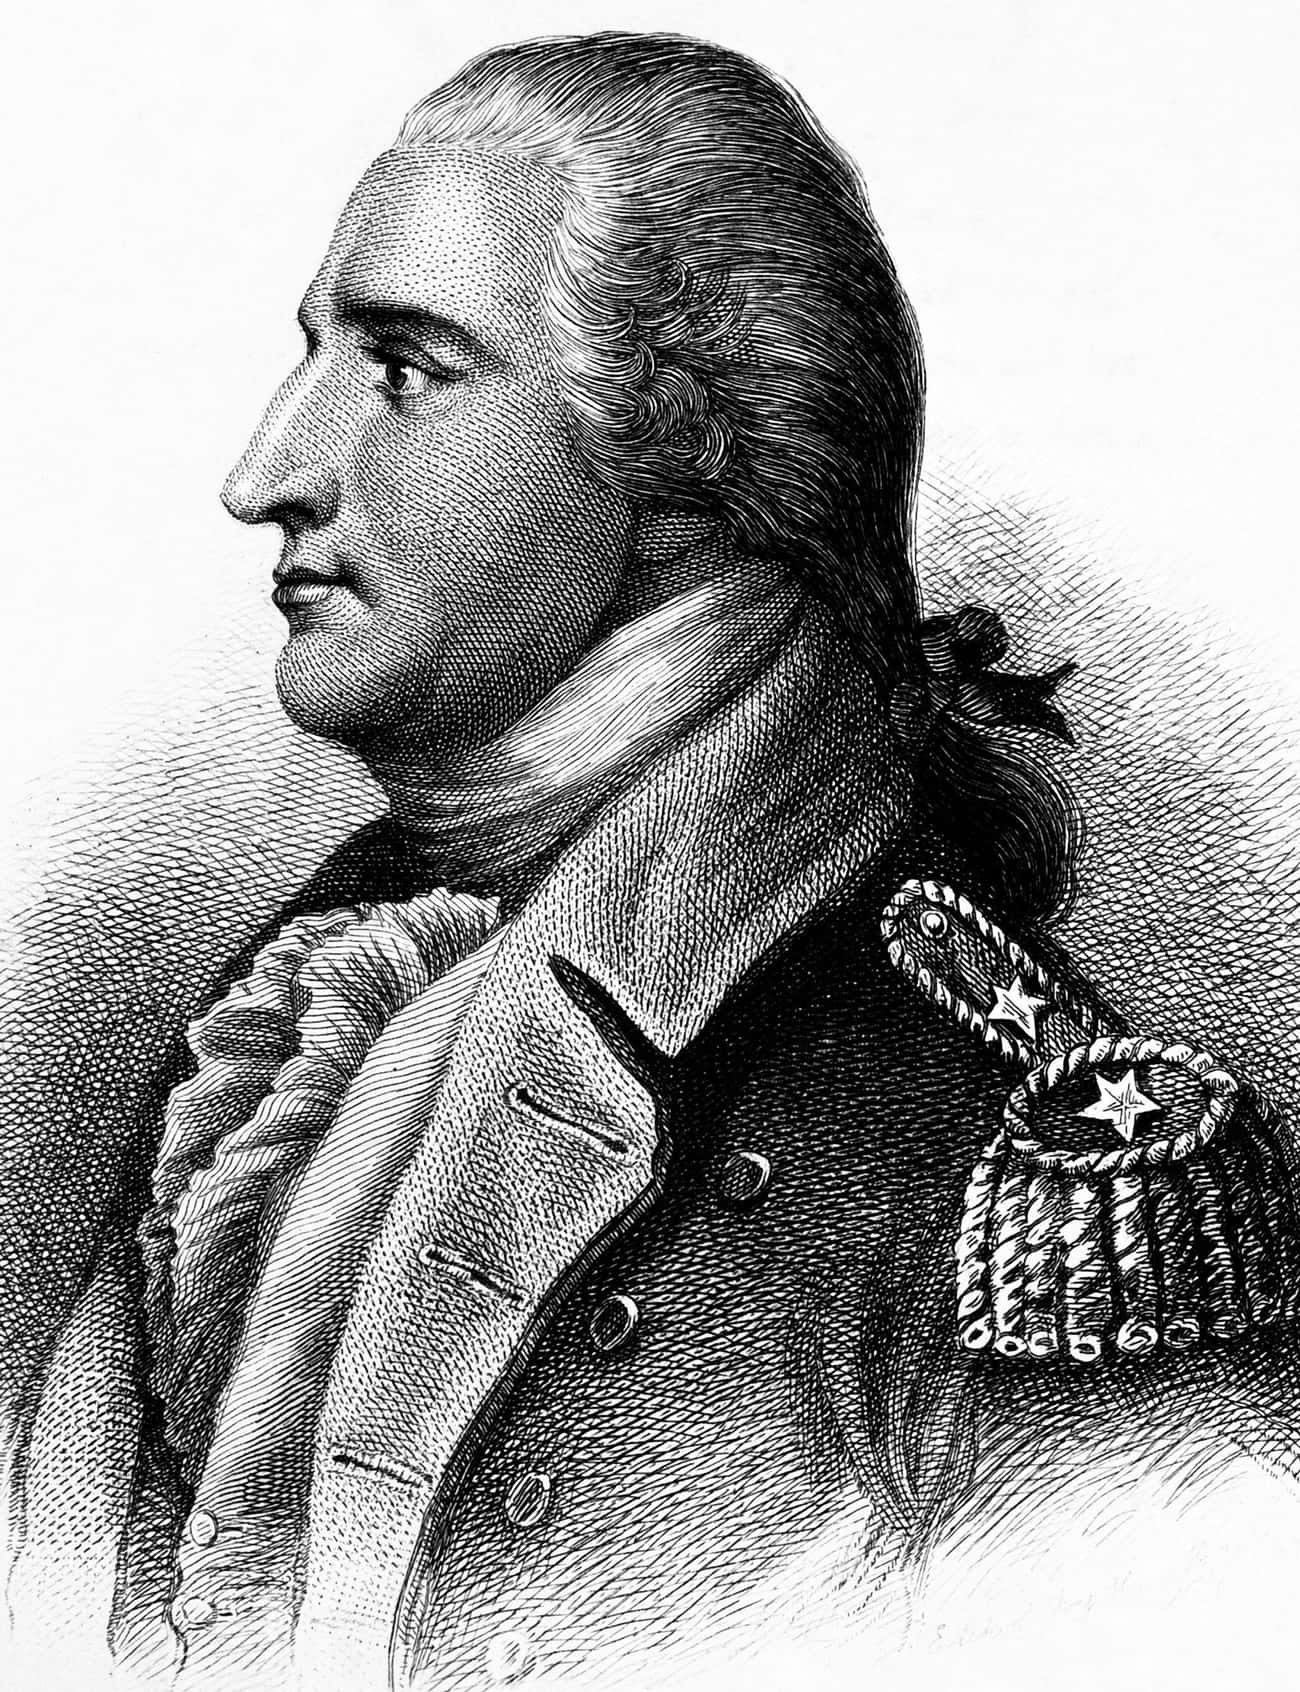 Benedict Arnold Was One Of The Earliest People To Form A Revolutionary Militia And Join The Sons Of Liberty